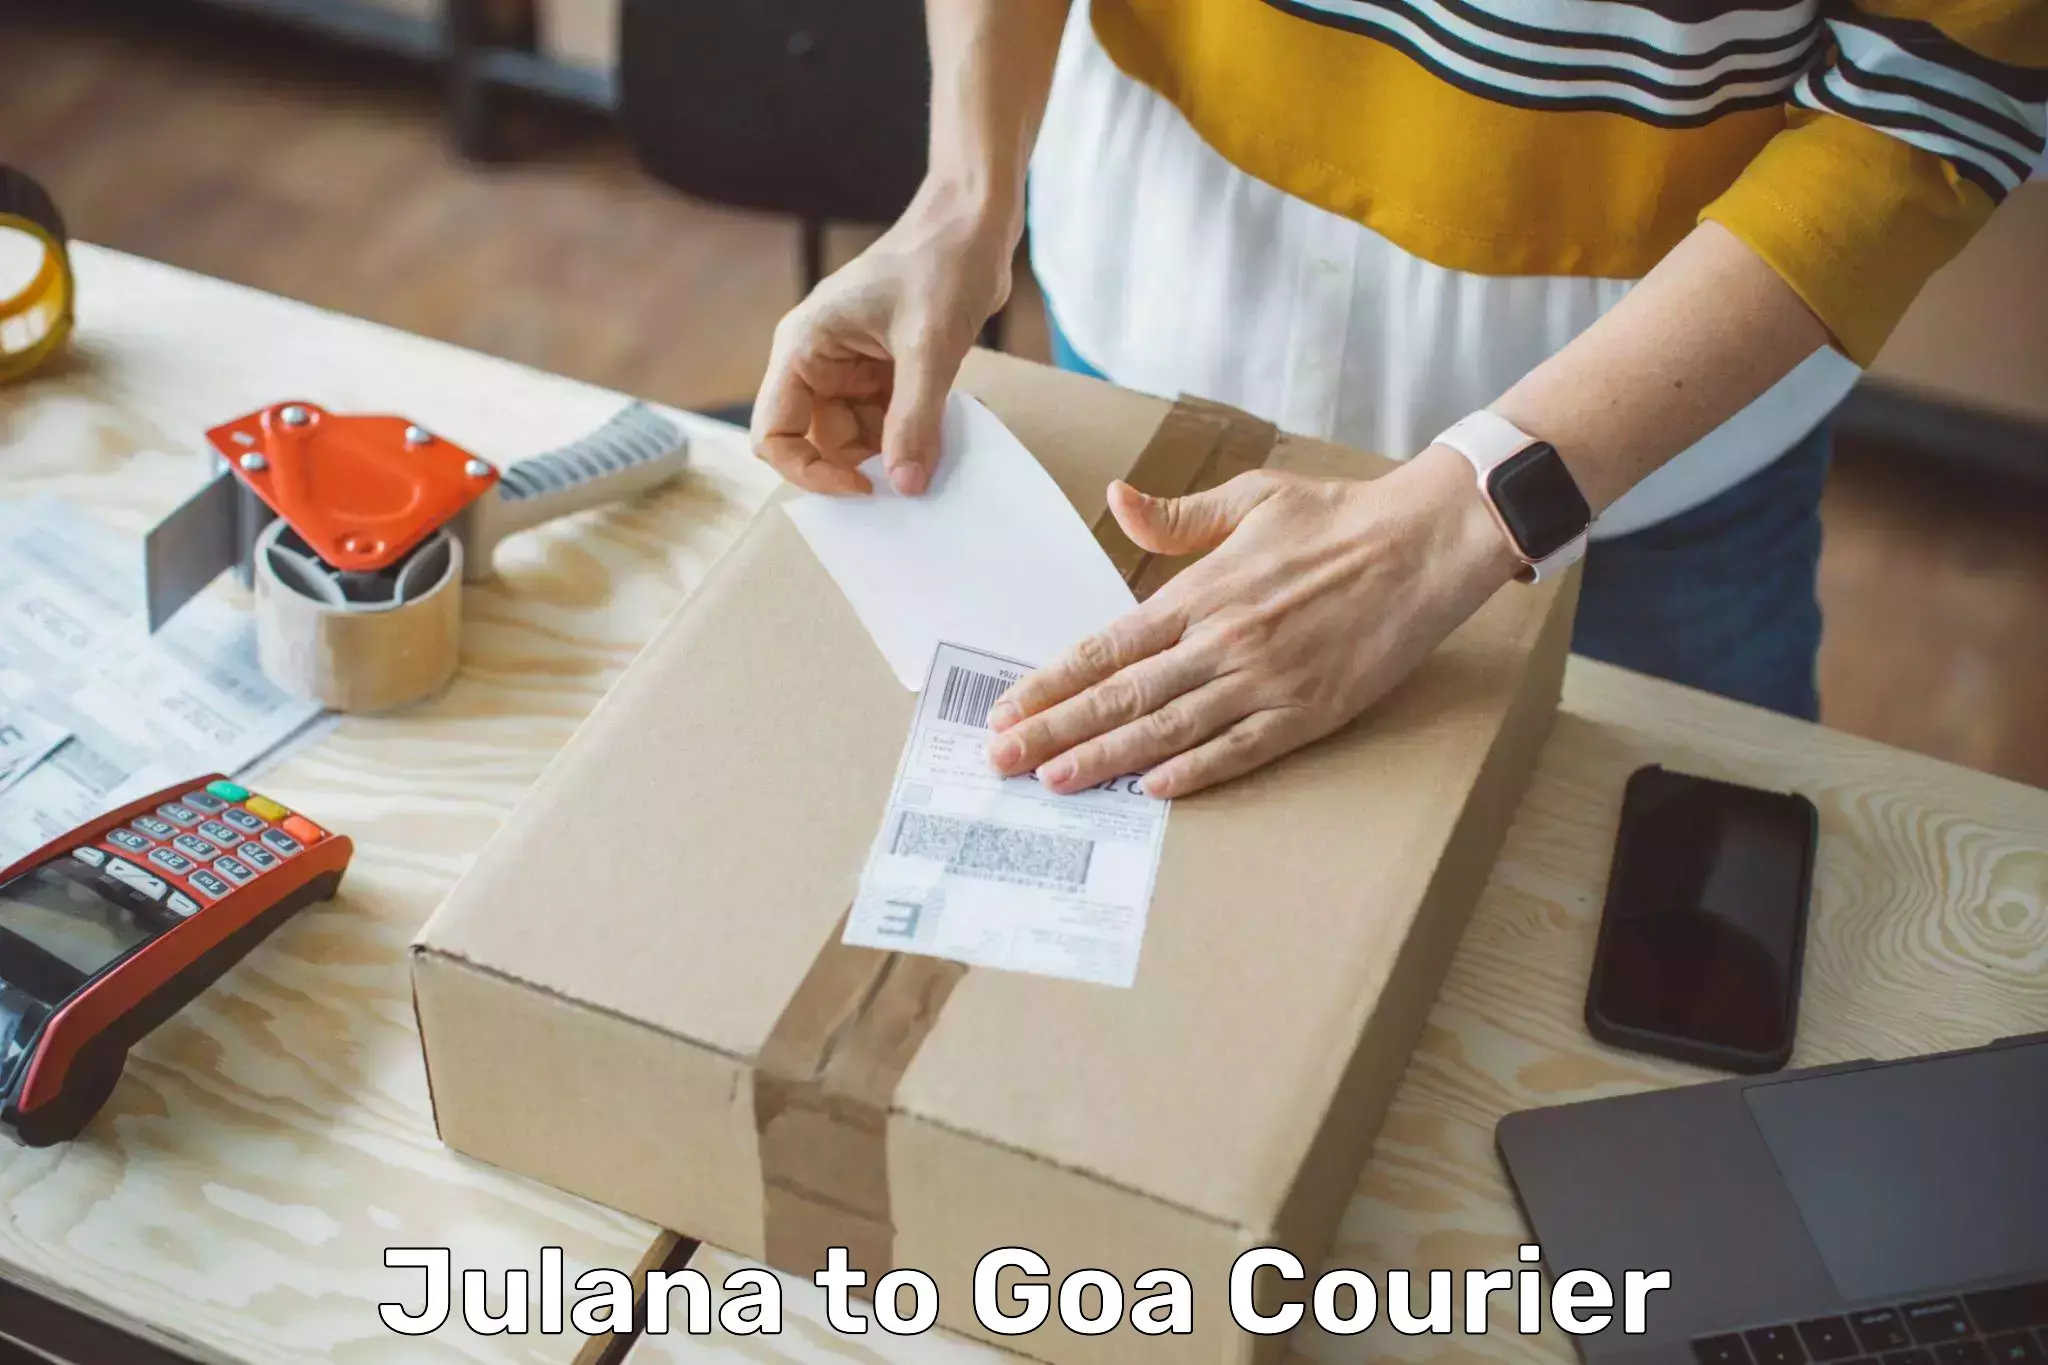 Rural area delivery Julana to Goa